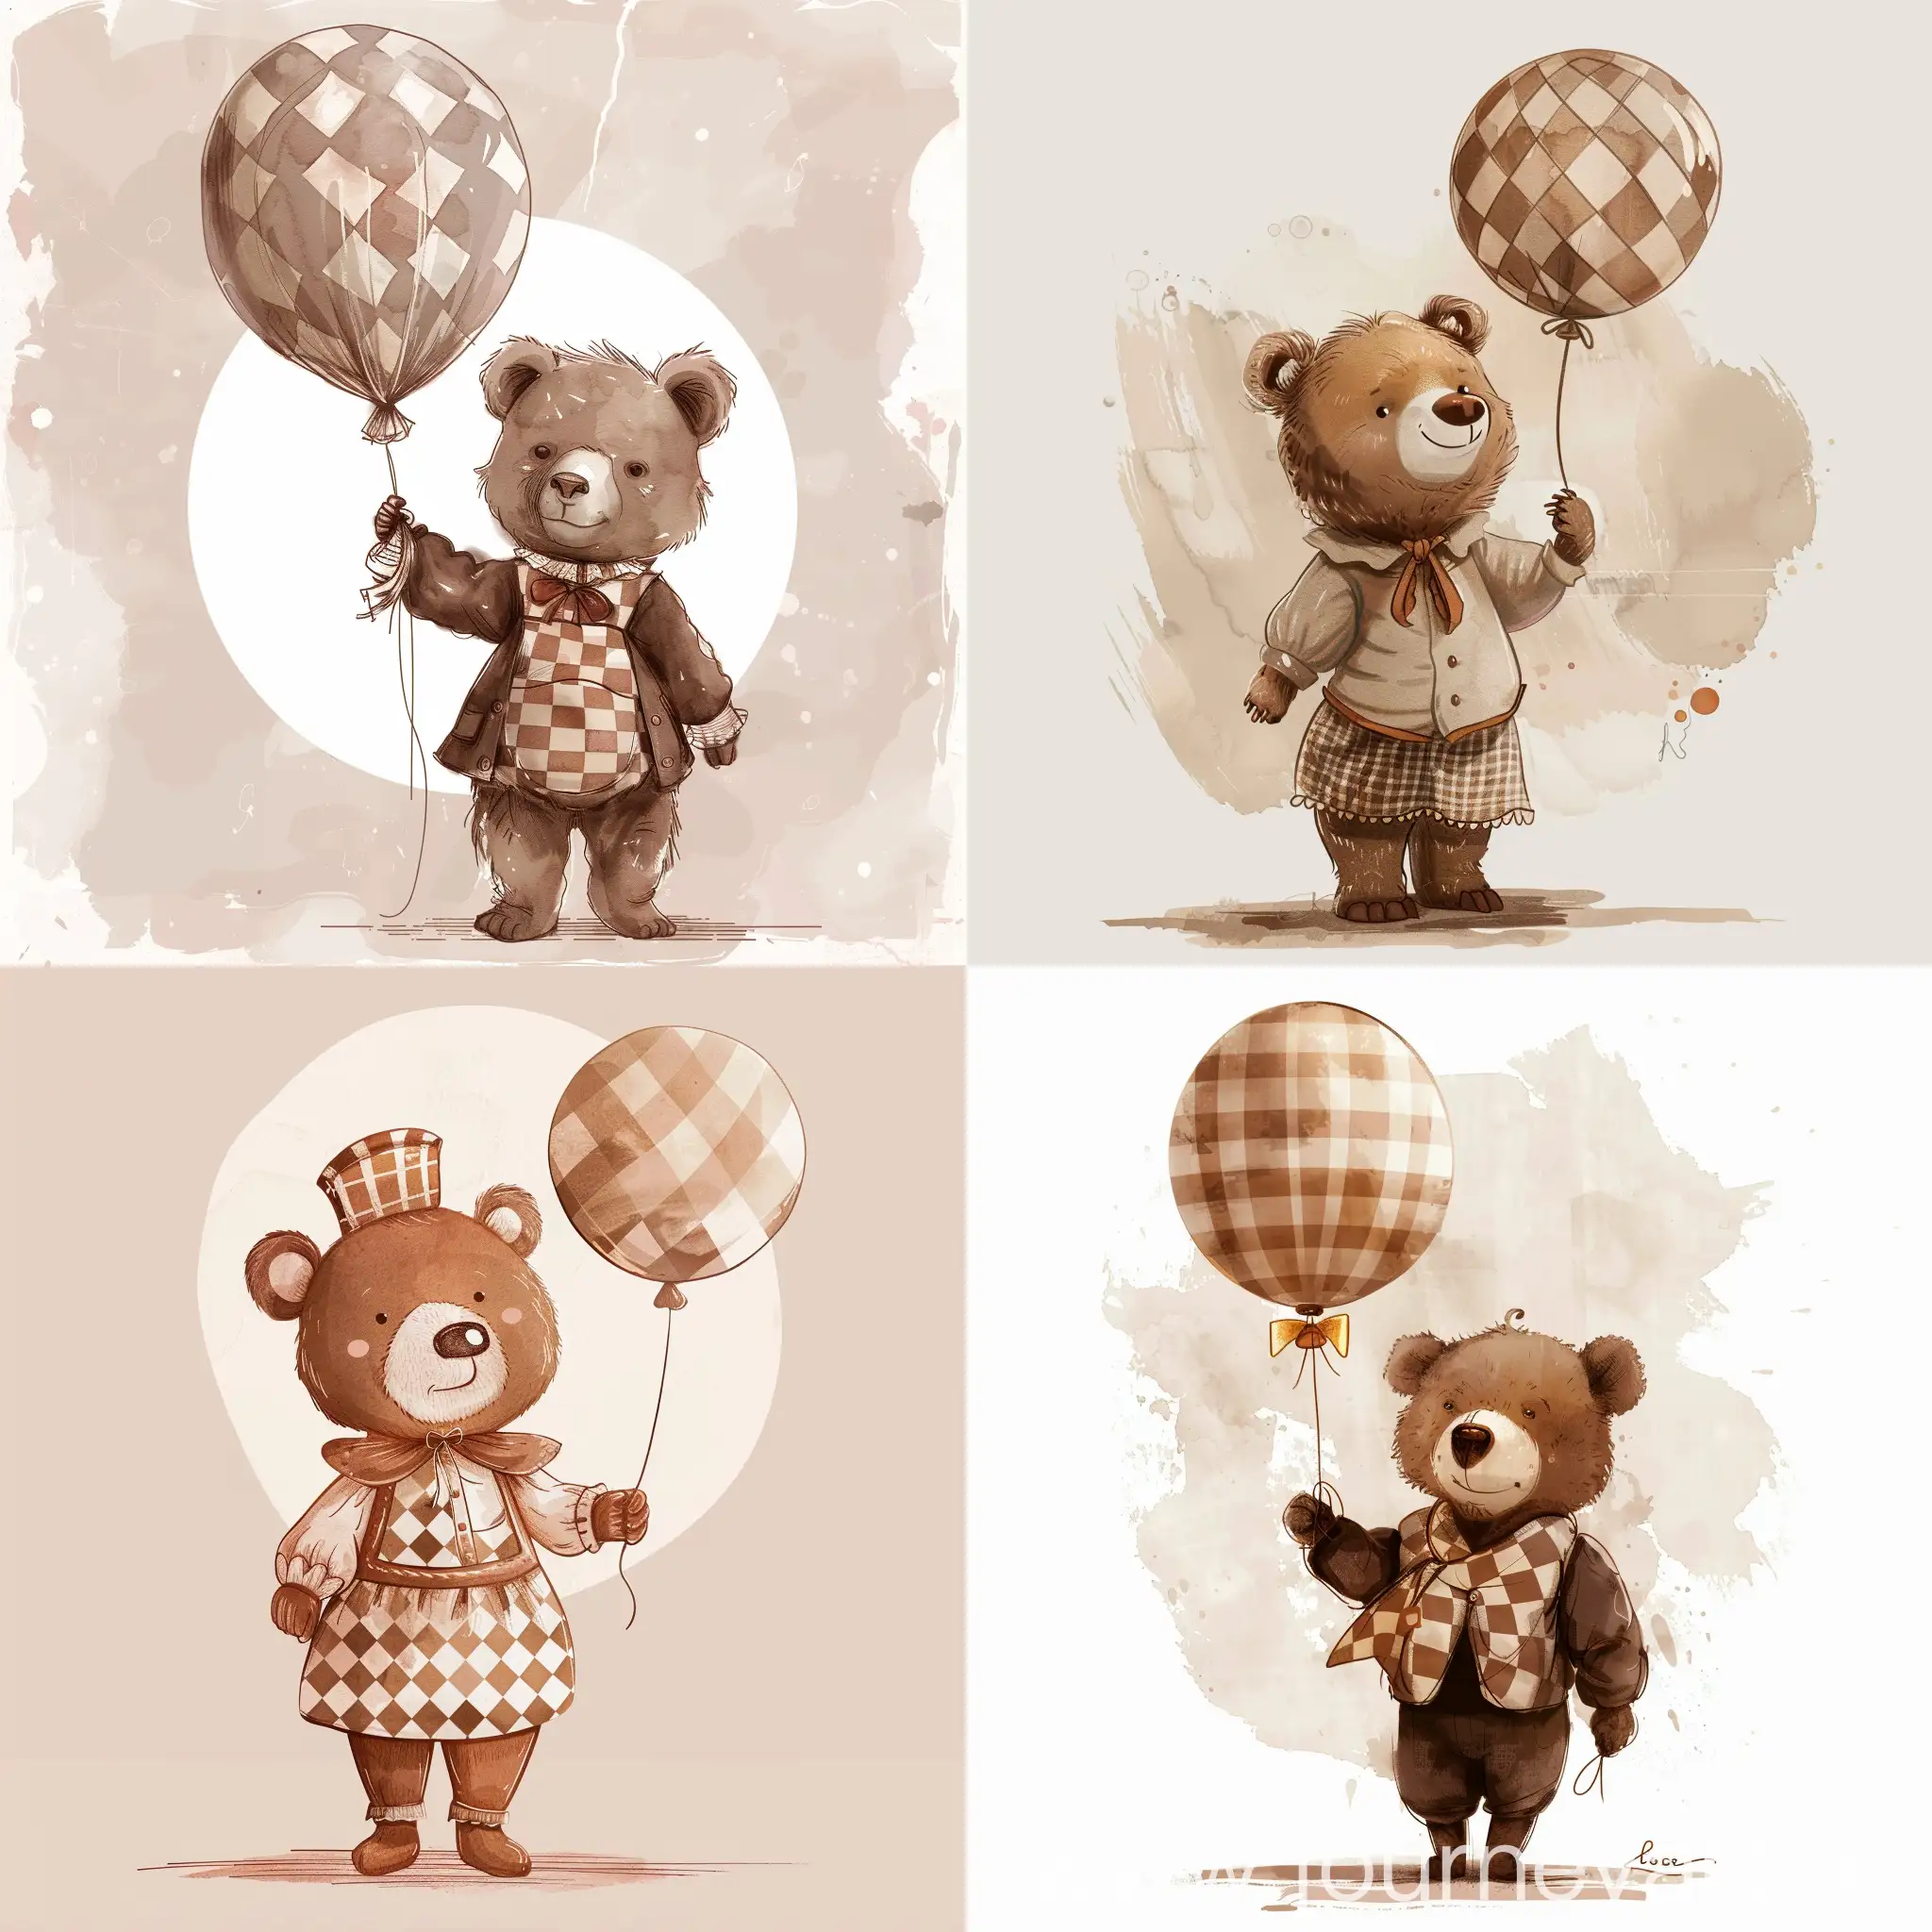 A cute brown bear in vintage circus attire, holding a balloon with a checkered pattern, illustrated in the style of a clipart style isolated on a white background, with neutral colors and low color saturation, in a watercolor style, with a beige illustration, a hand drawn doodle simple minimalistic vector art drawing, like a children's book illustration, with a flat design using solid shapes and soft muted tones with no outlines.